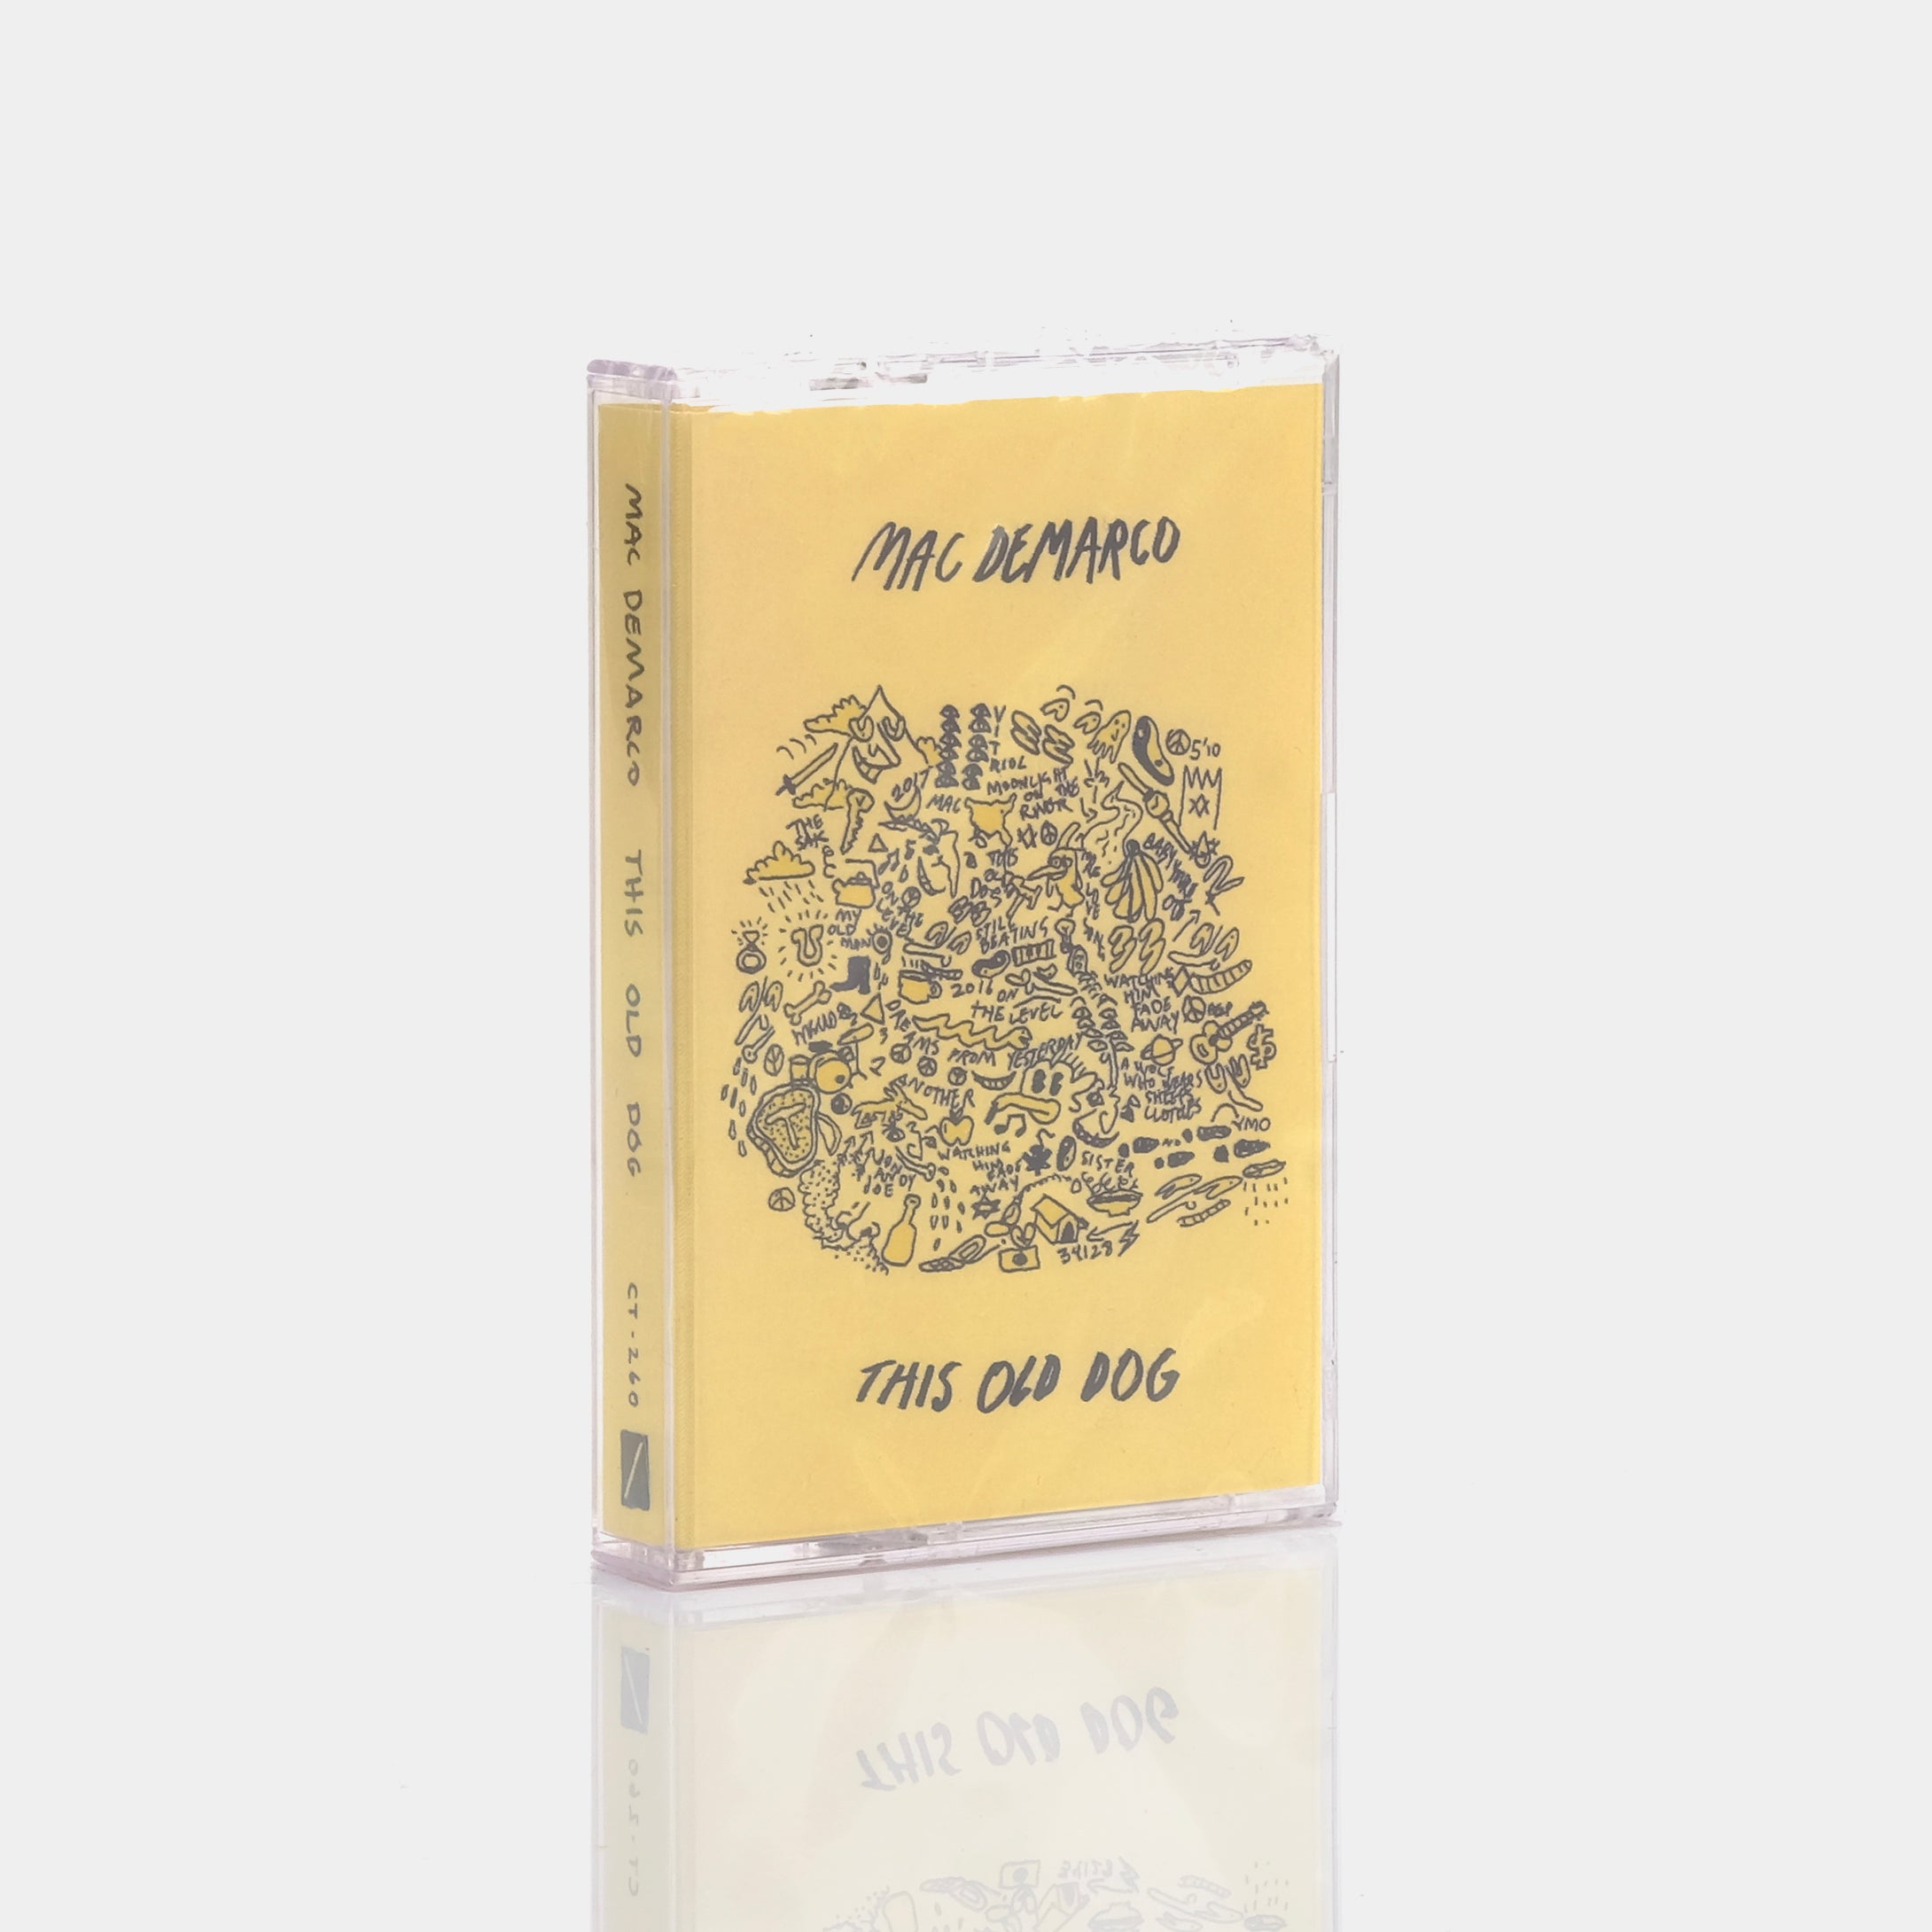 Mac Demarco - This Old Dog Cassette Tape